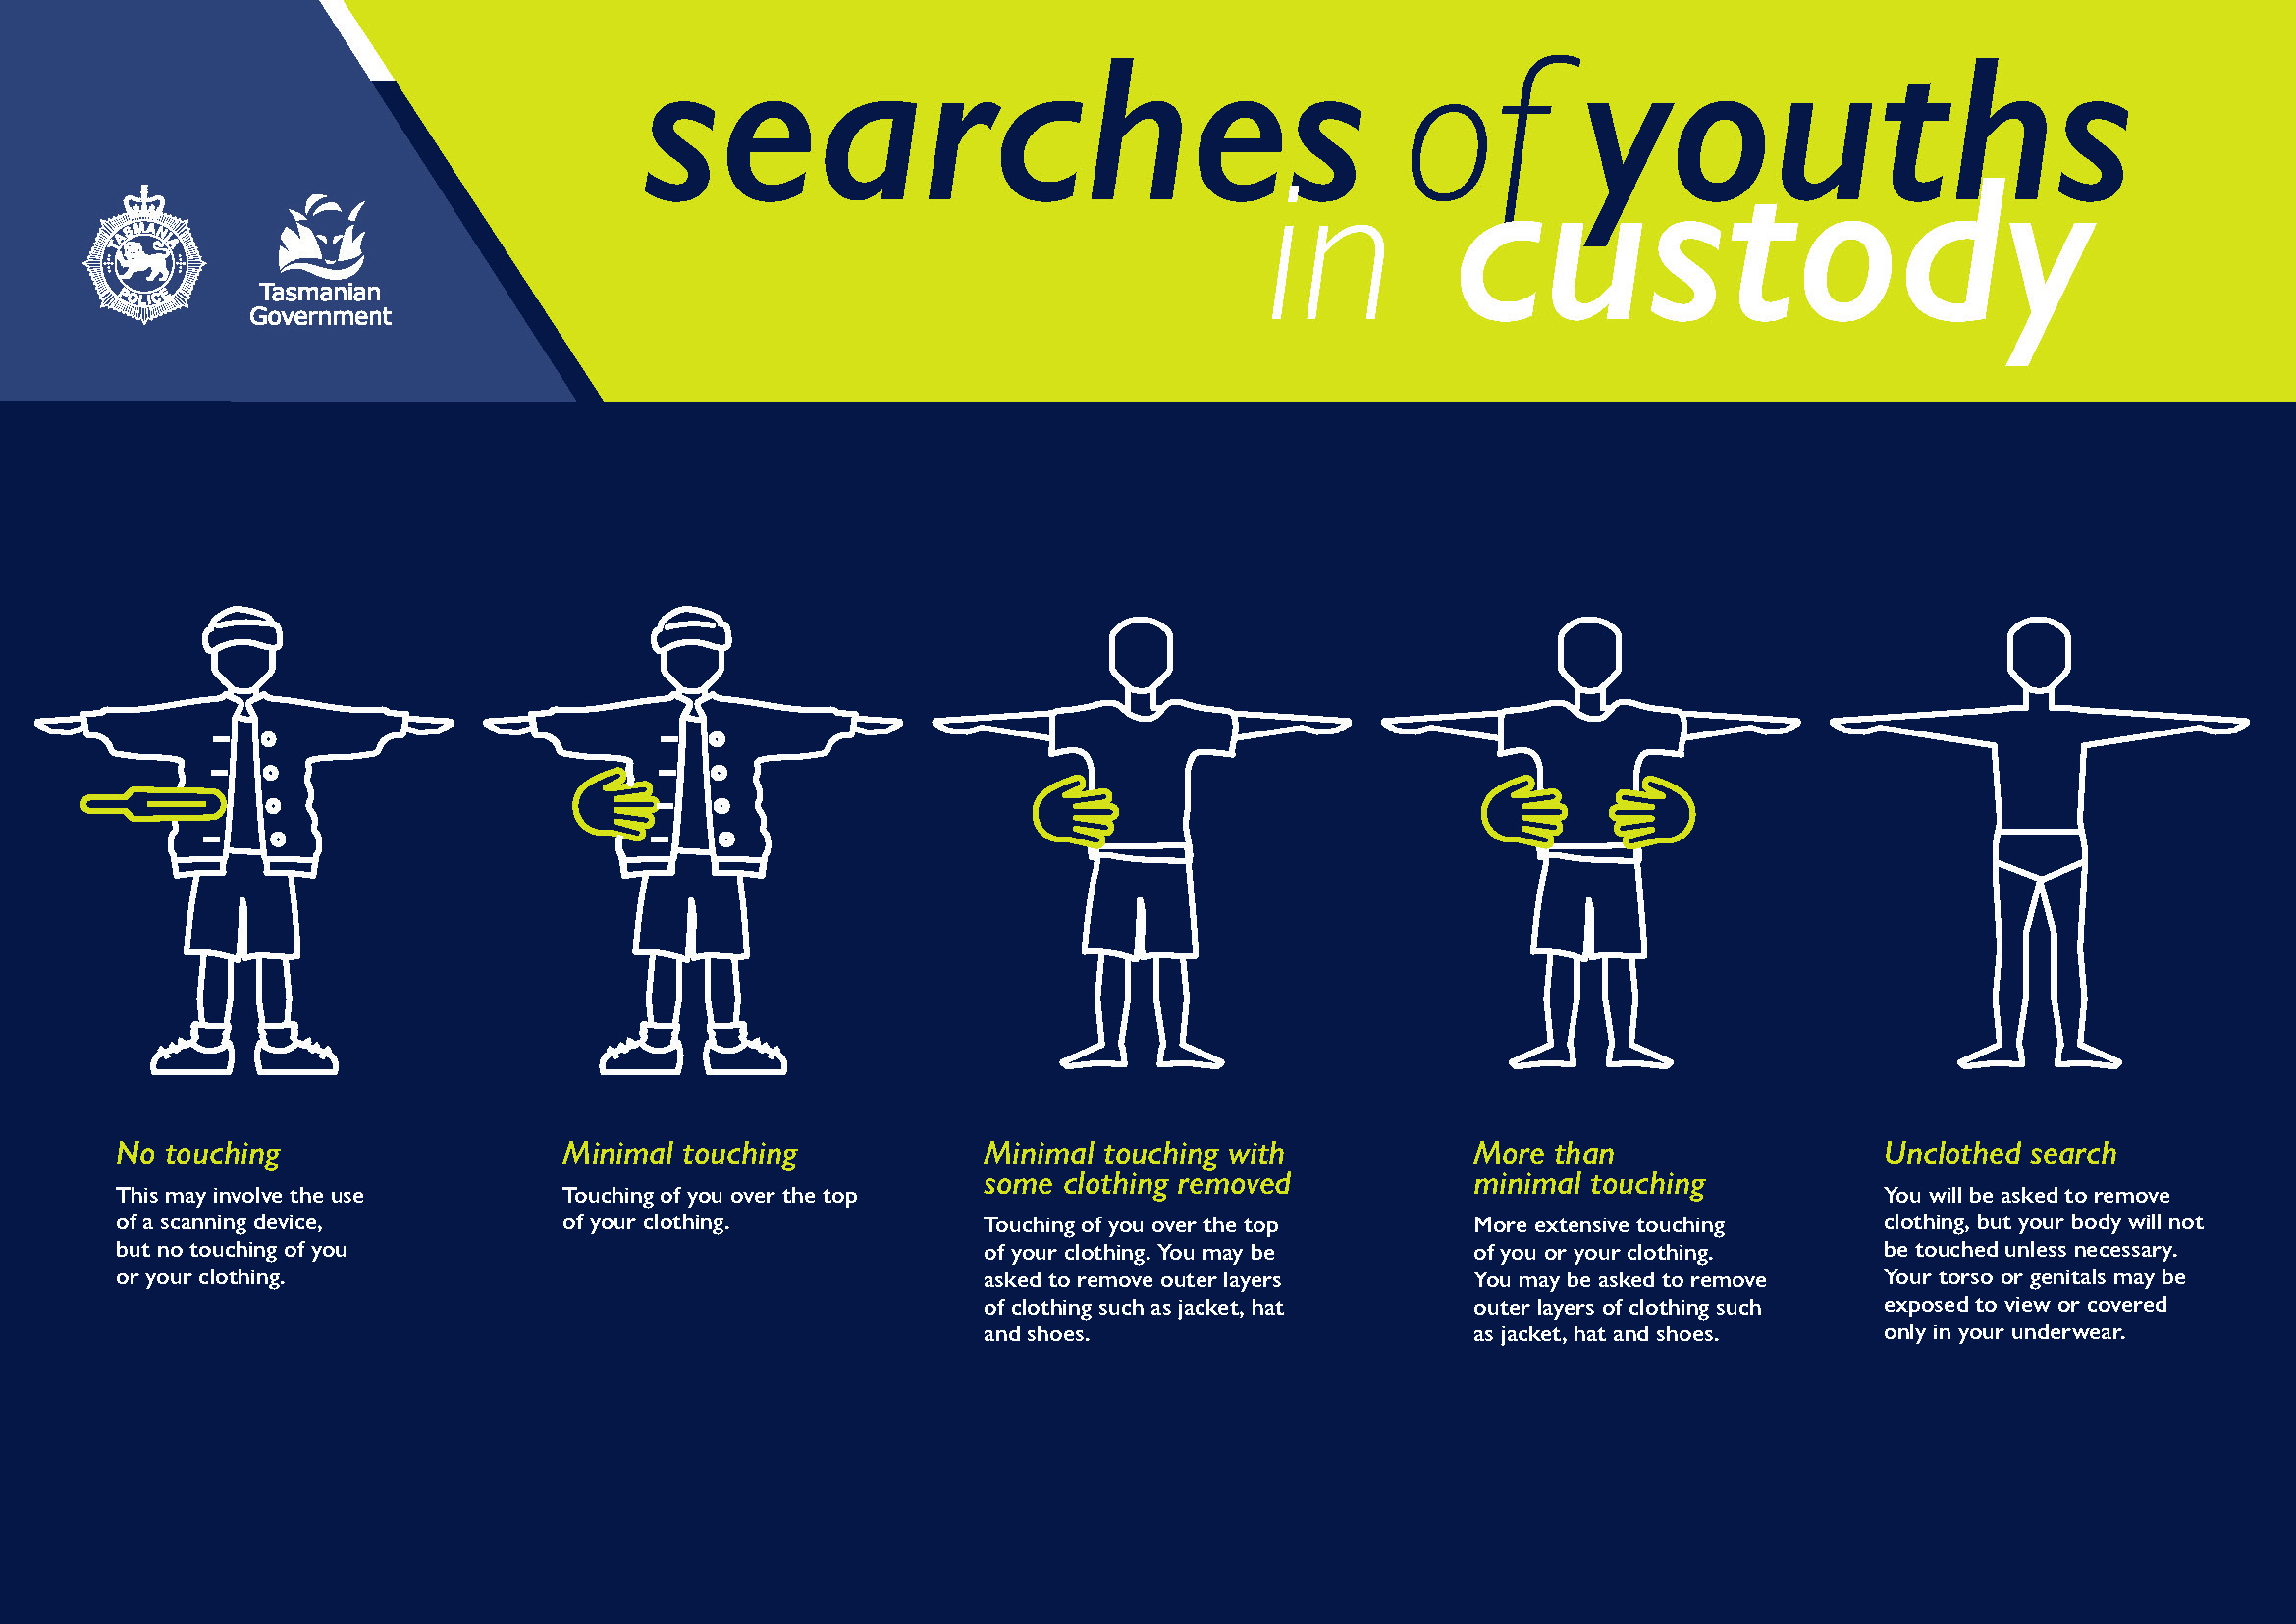 Page 1 of flyer detailing searches of youths in custody (available as pdf)